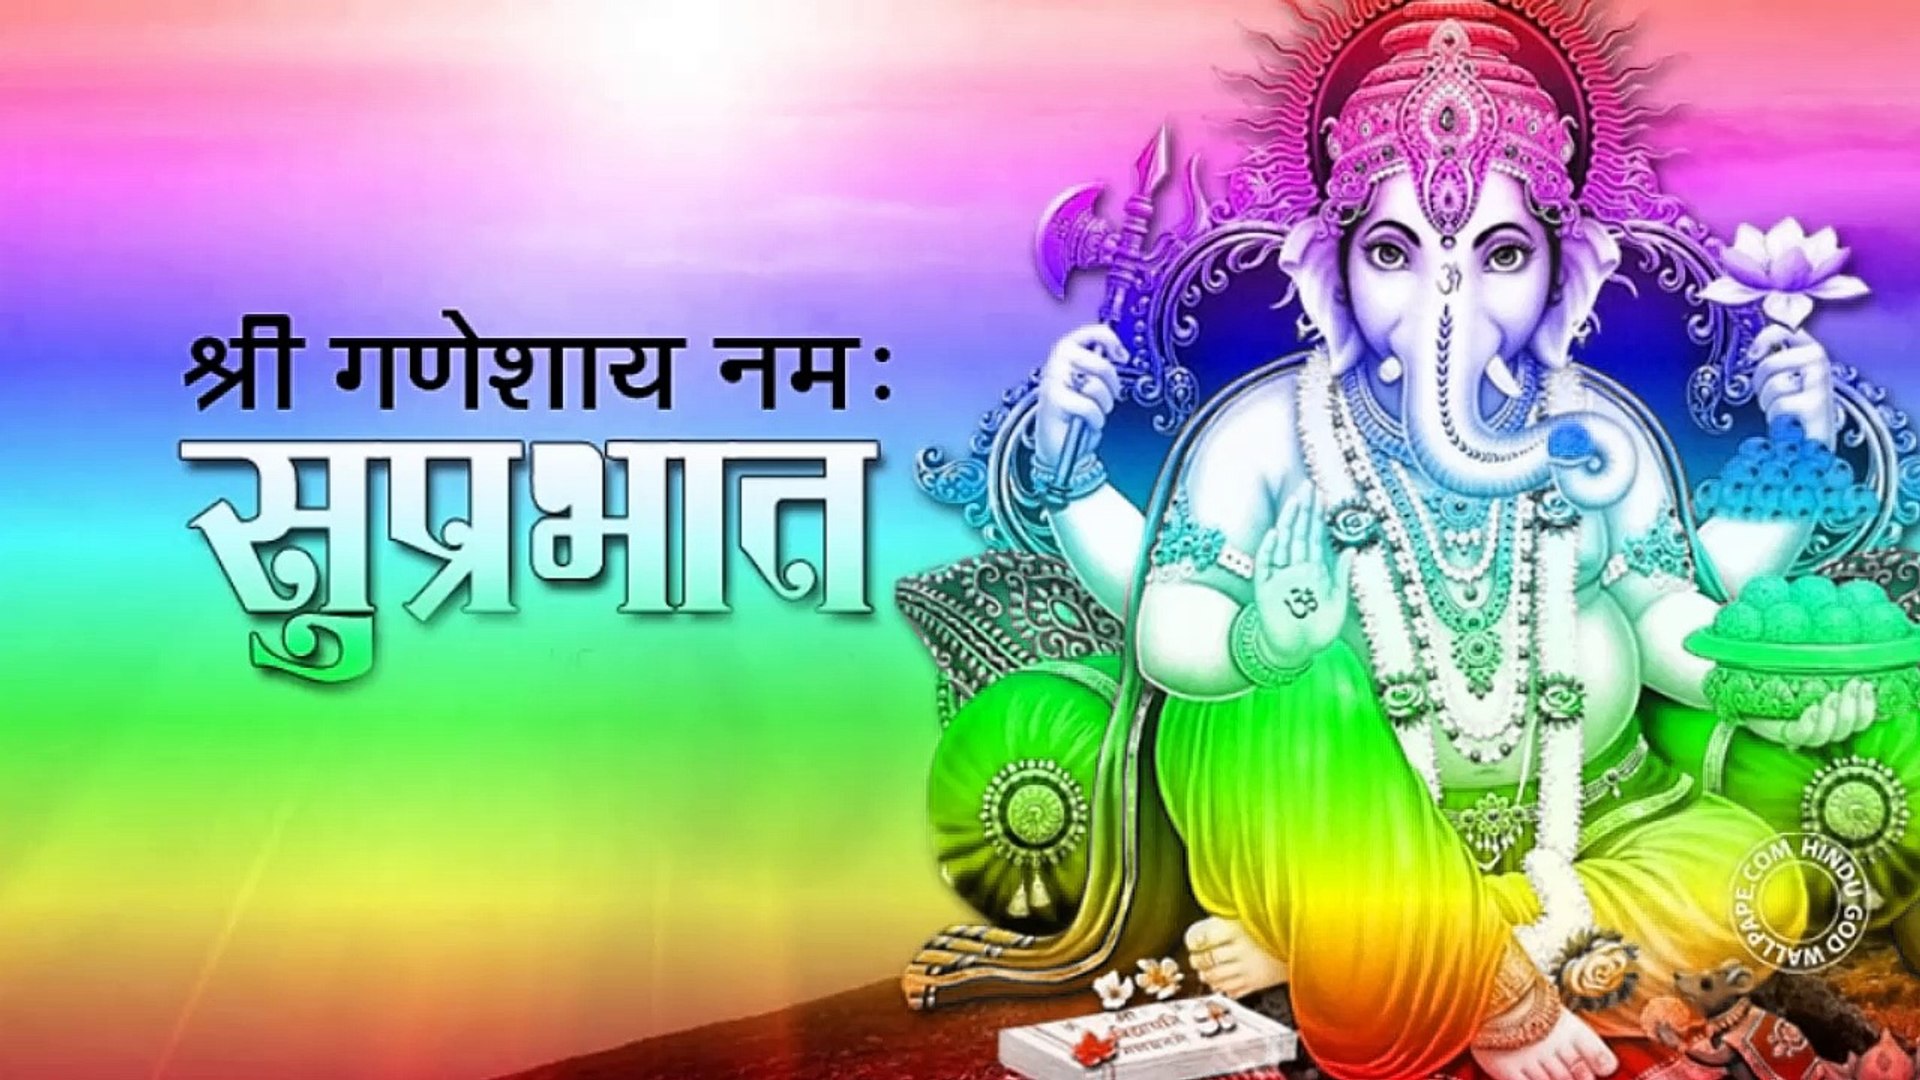 Good Morning Wishes In Hindi Good Morning Greetings Wallpapers E